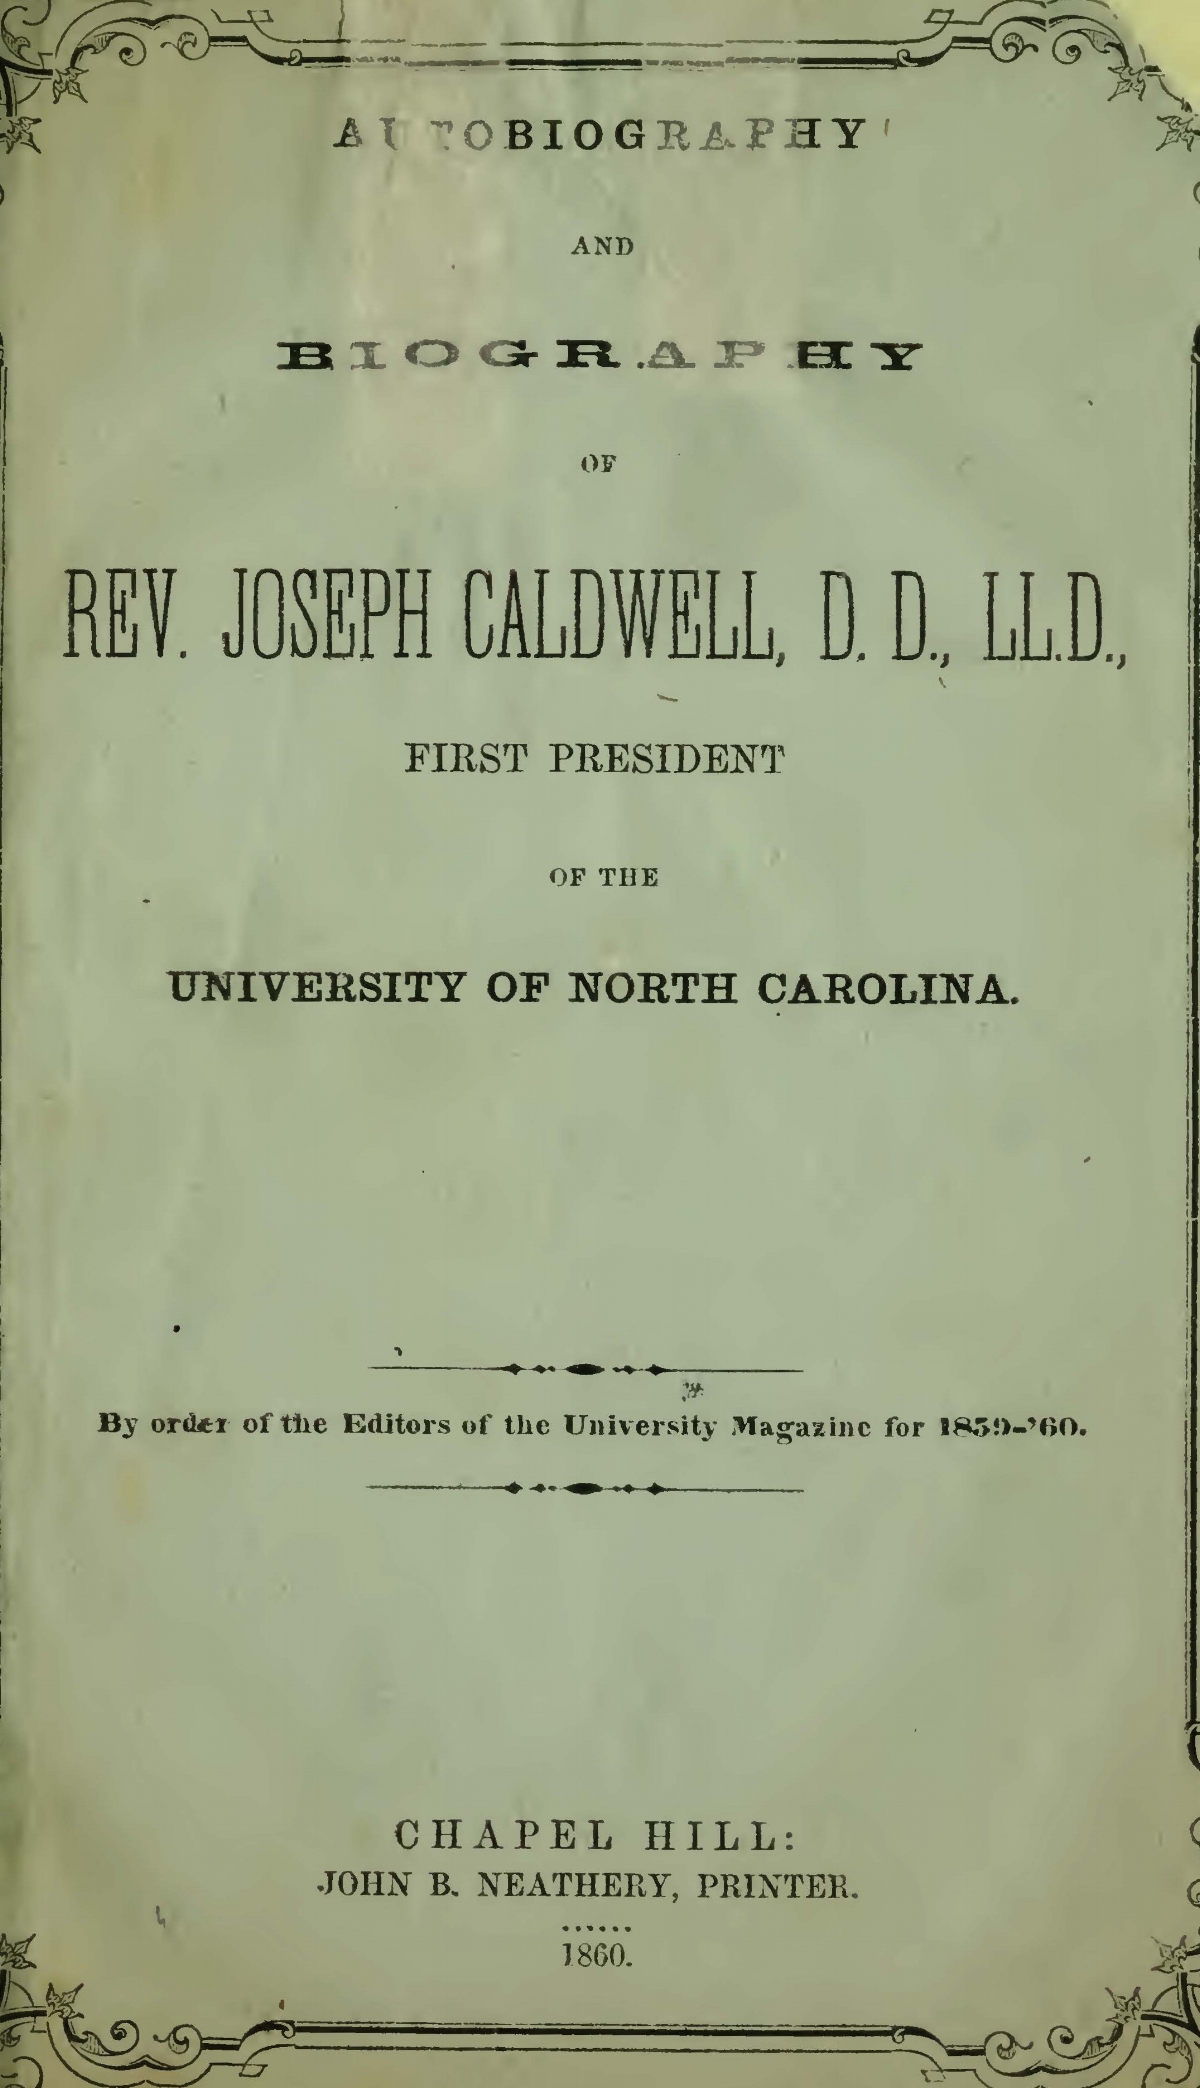 Caldwell, Joseph, Autobiography and Biography Title Page.jpg